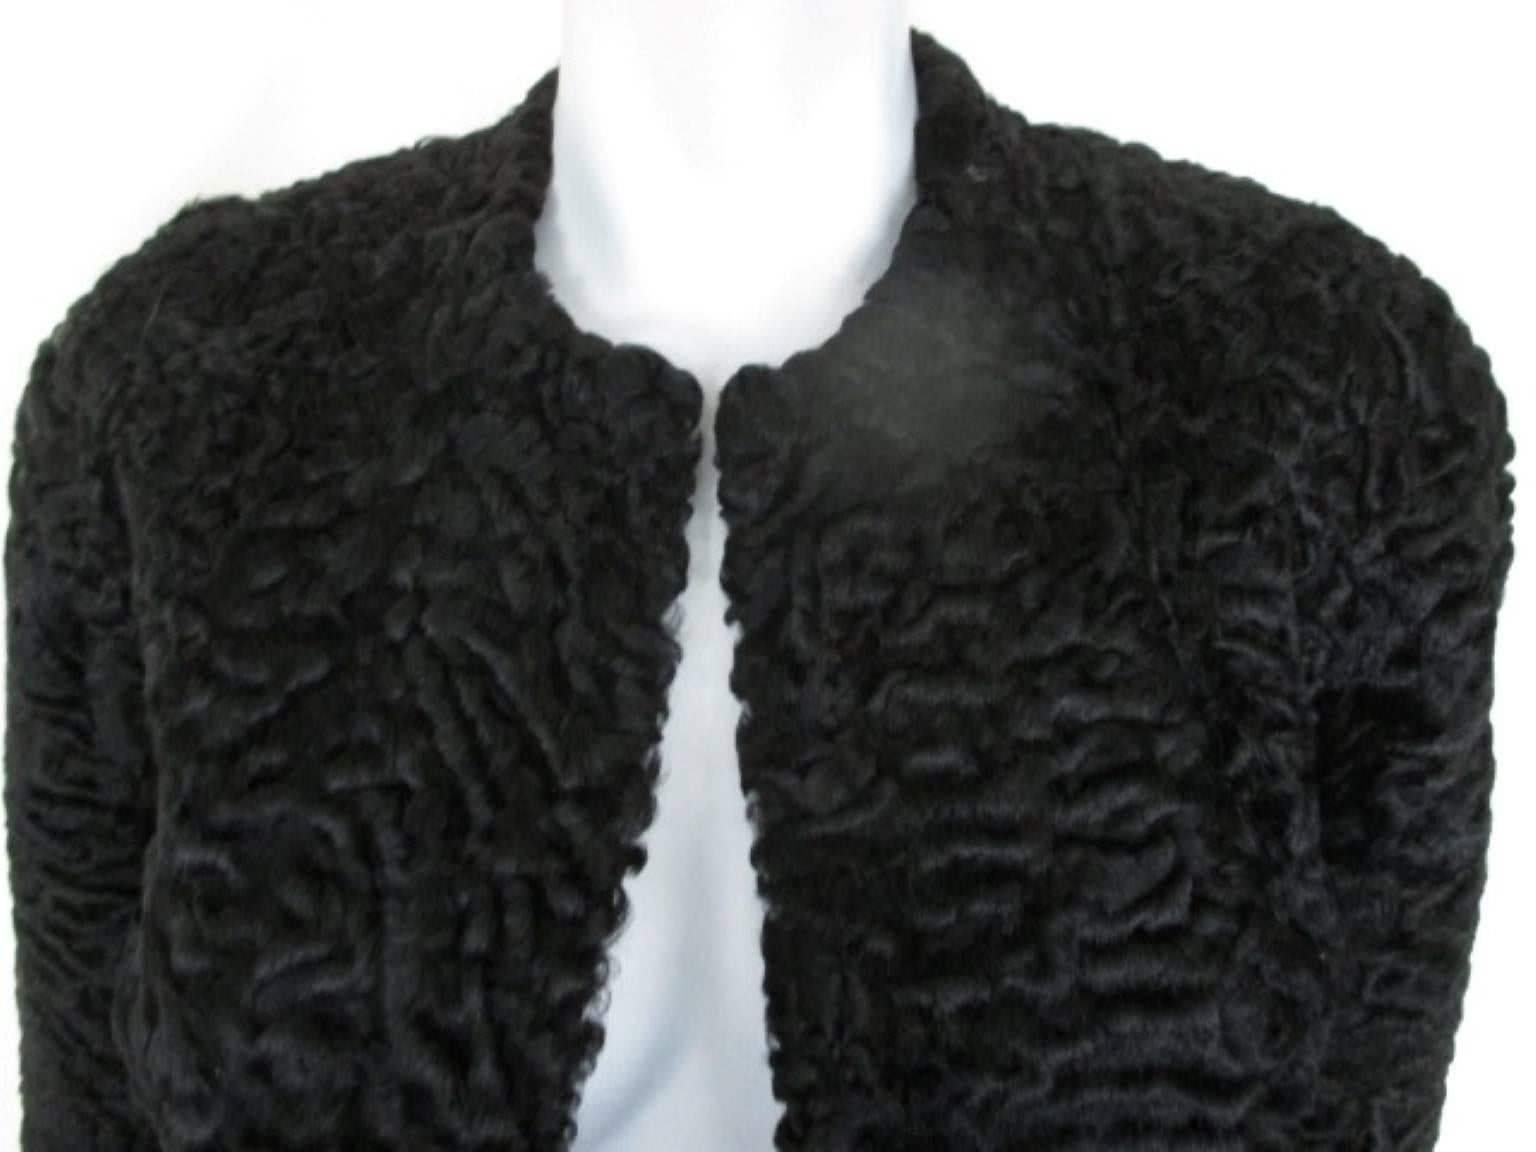 This vintage jacket/bolero is made of black persian lamb 
Its in pre-loved condition and very light and easy to wear.
It has 3/4 sleeves
Size fits as small, see section measurements.
Please note that vintage items are not new and therefore might